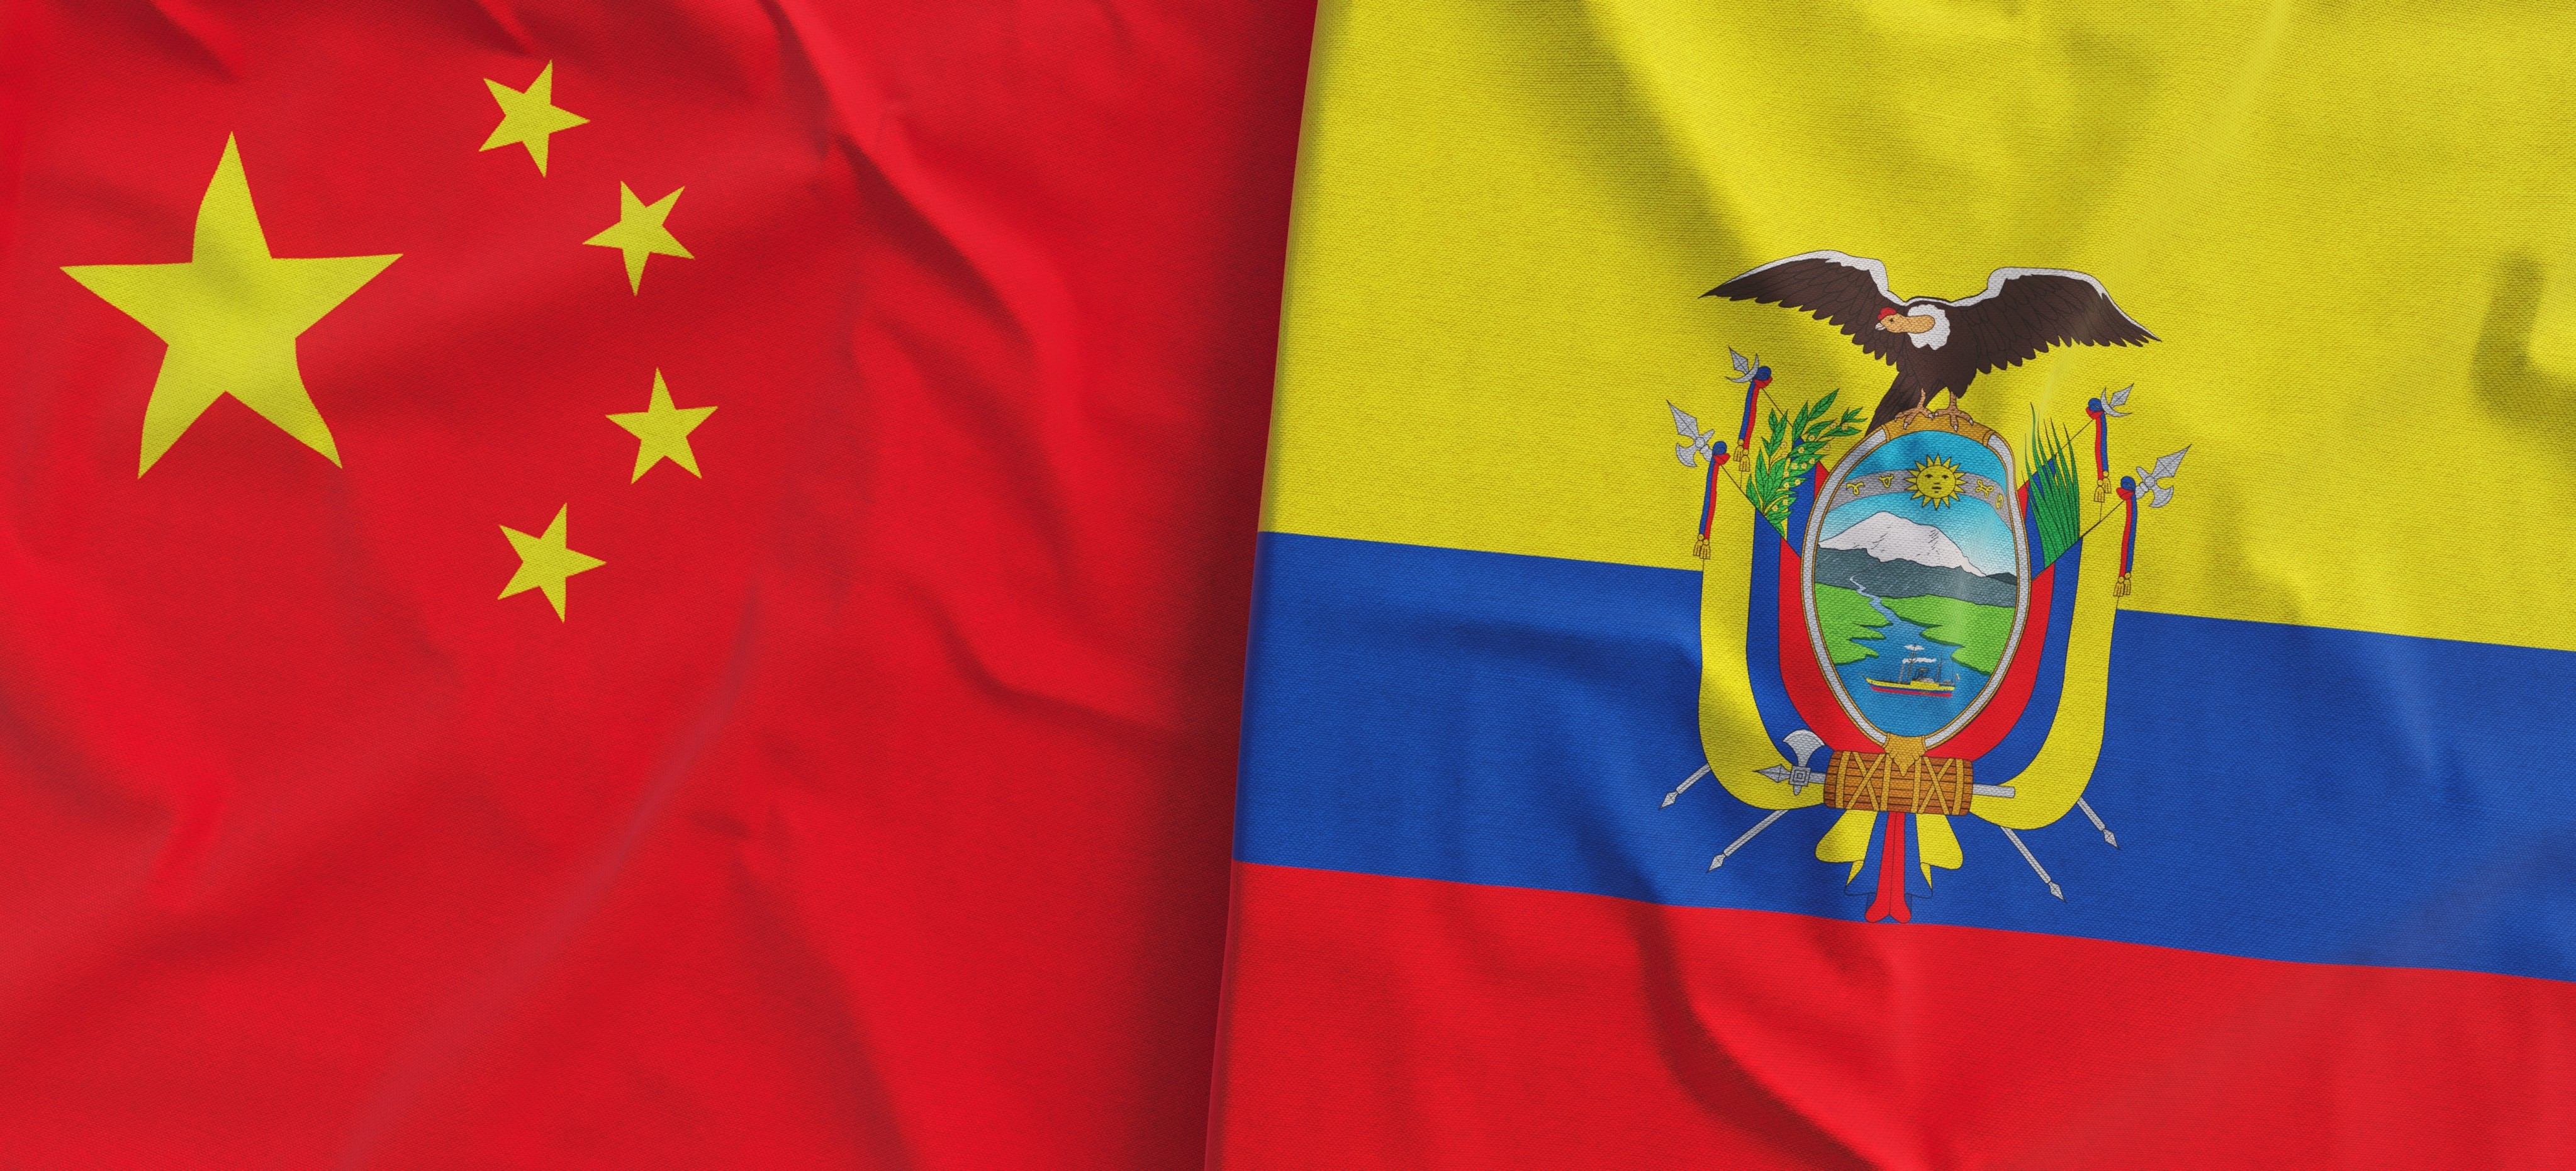 Ecuadorean President Guillermo Lasso has turned to multilateral organisations for financing to reactivate the pandemic-hit economy, and renegotiated a US$6.5 billion credit agreement with the IMF, which ends this year. Photo: Shutterstock Images